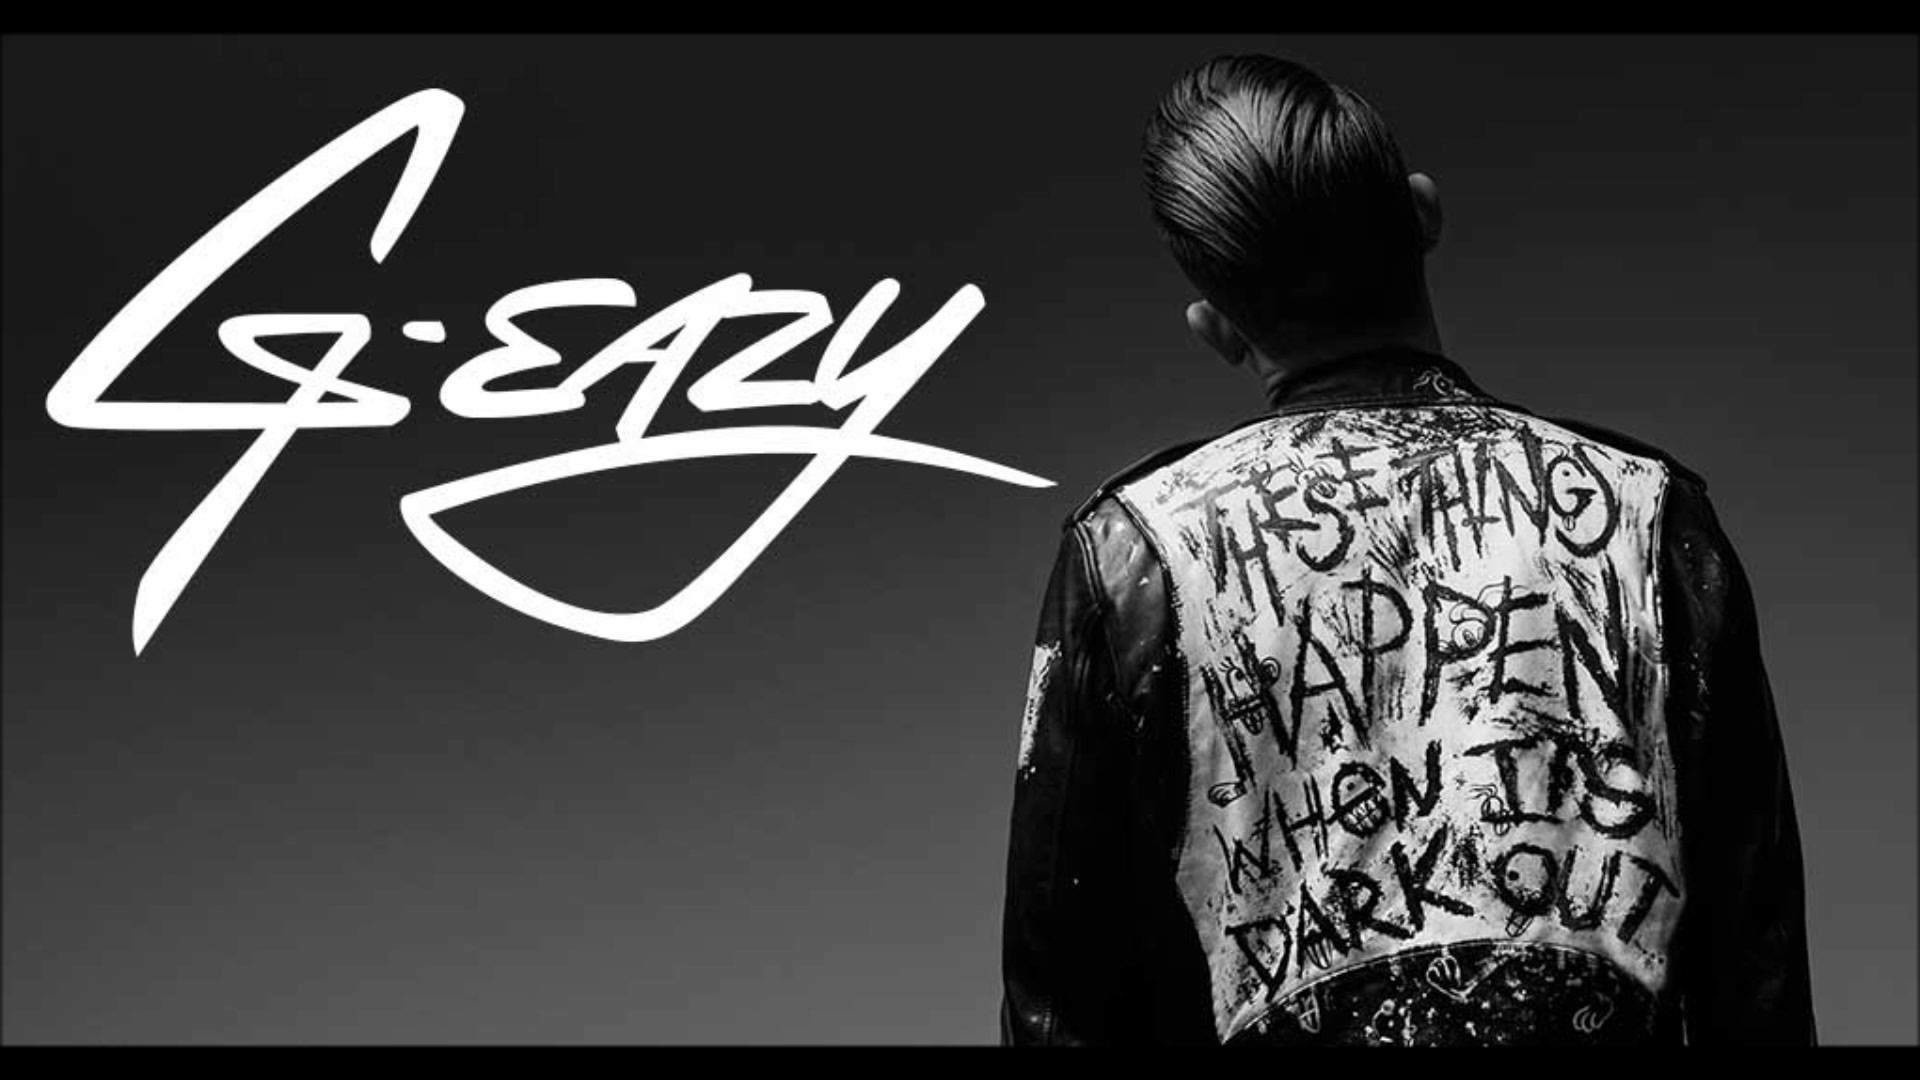 1920x1080 55 best images about G-eazy on Pinterest